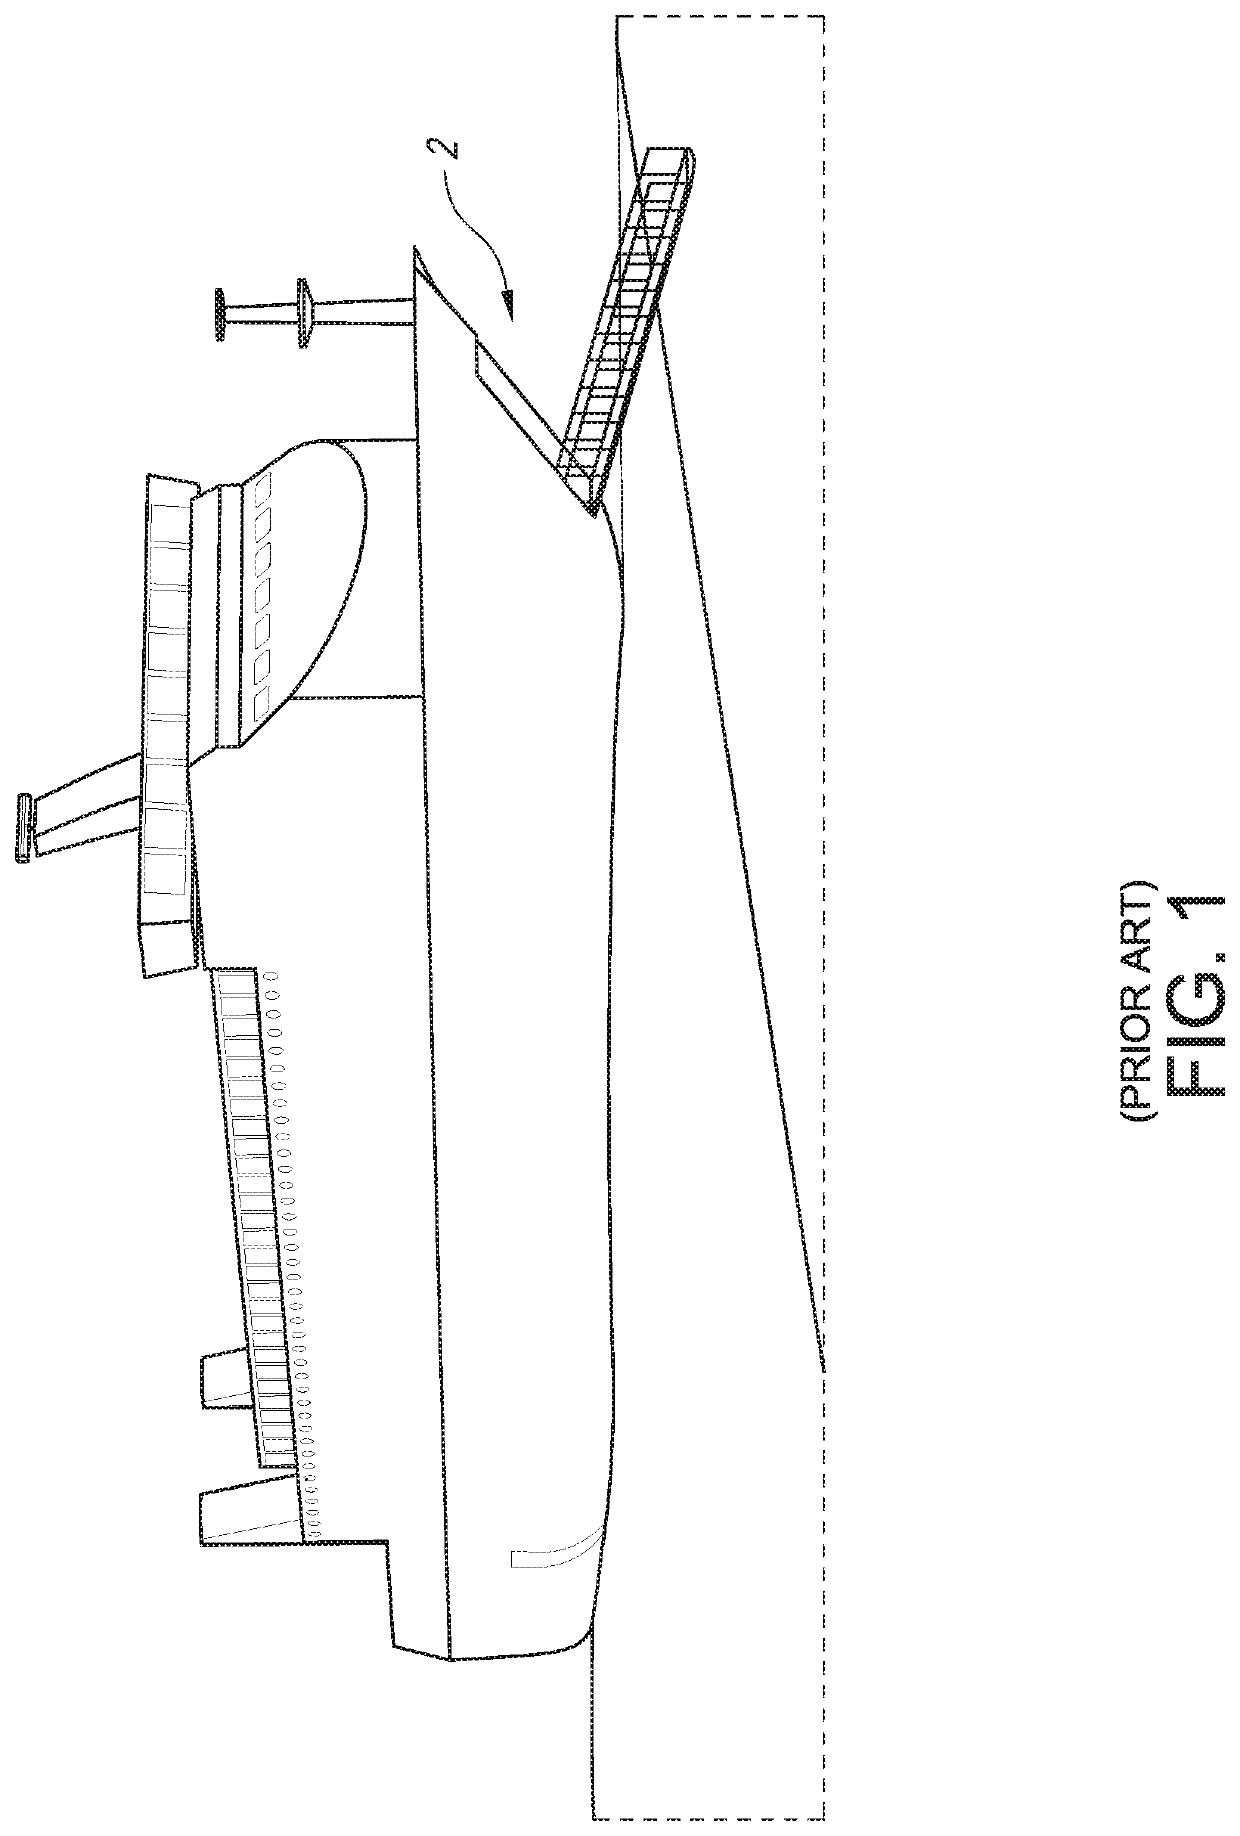 Passenger Vessel with Retractable, Concealable Bow Gangway and Method for Deploying, Retracting and Concealing a Passenger Vessel's Gangway